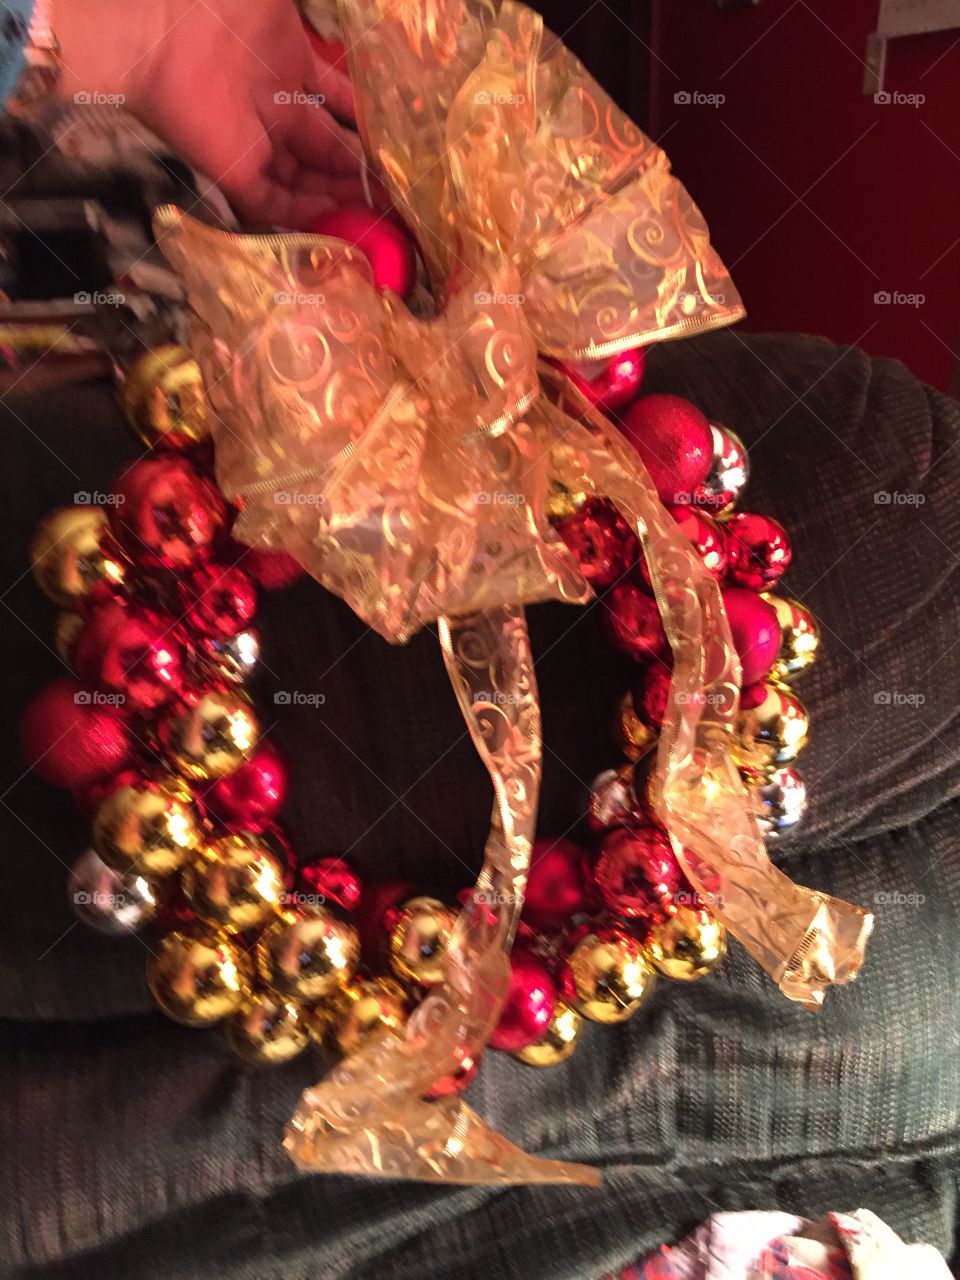 red and gold wreath